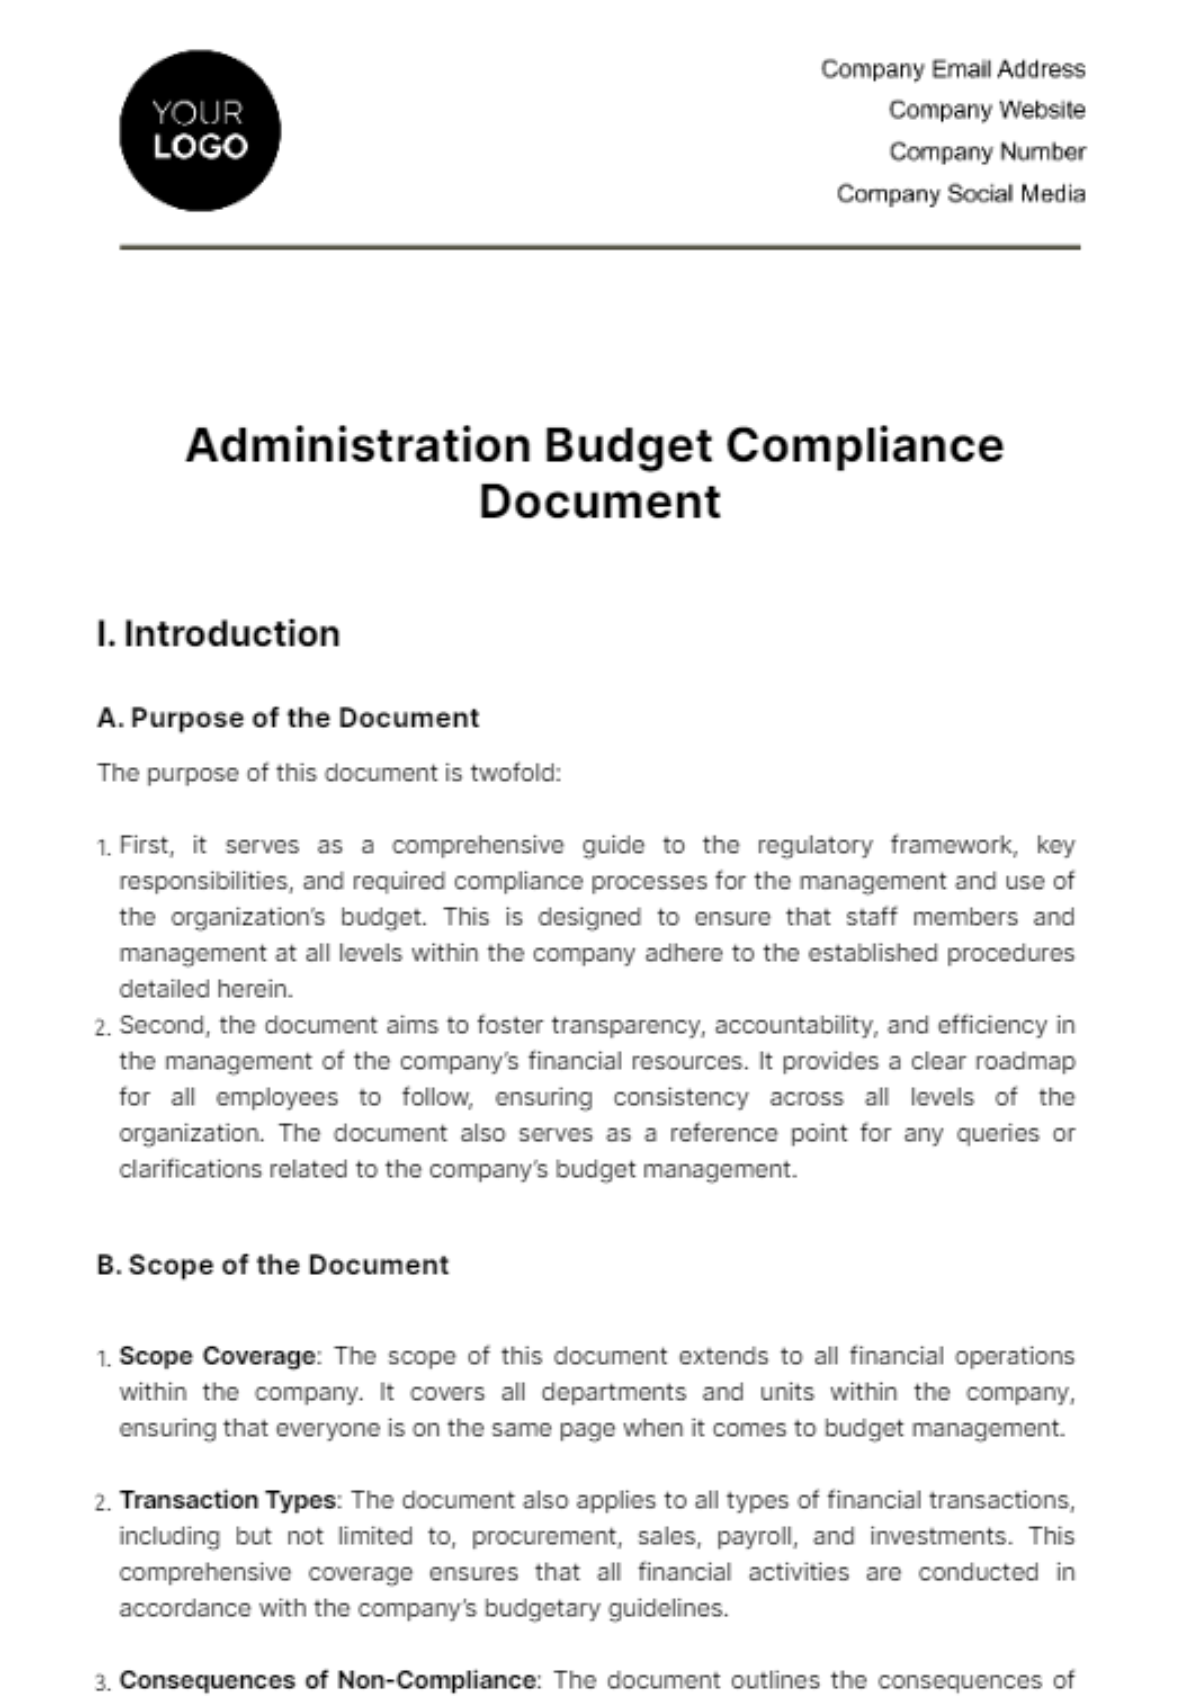 Administration Budget Compliance Document Template